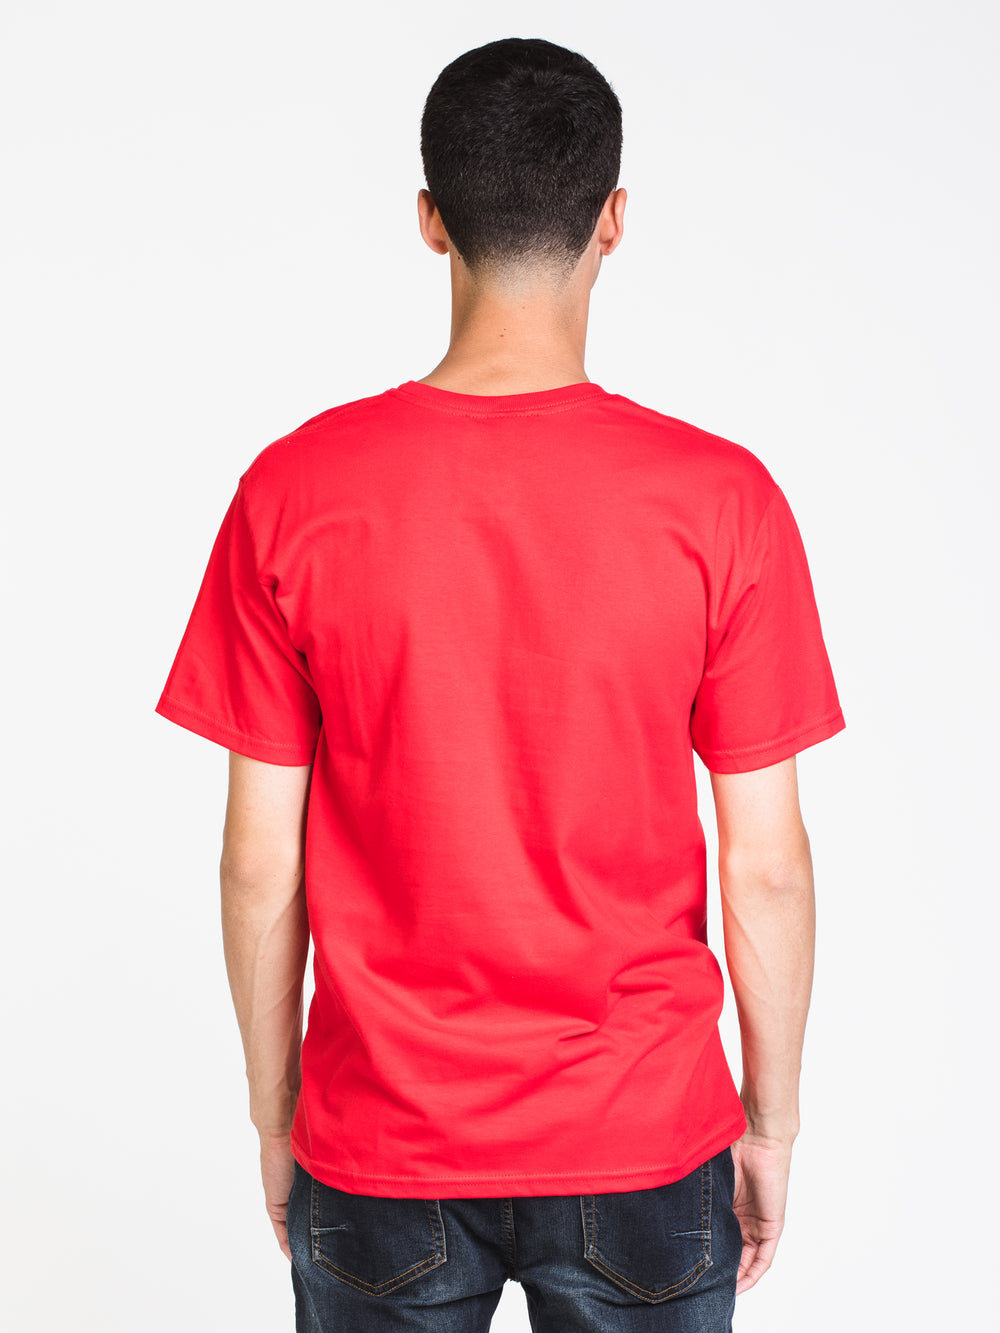 MENS BLOCK BUSTER SHORT SLEEVE T-SHIRT- RED - CLEARANCE